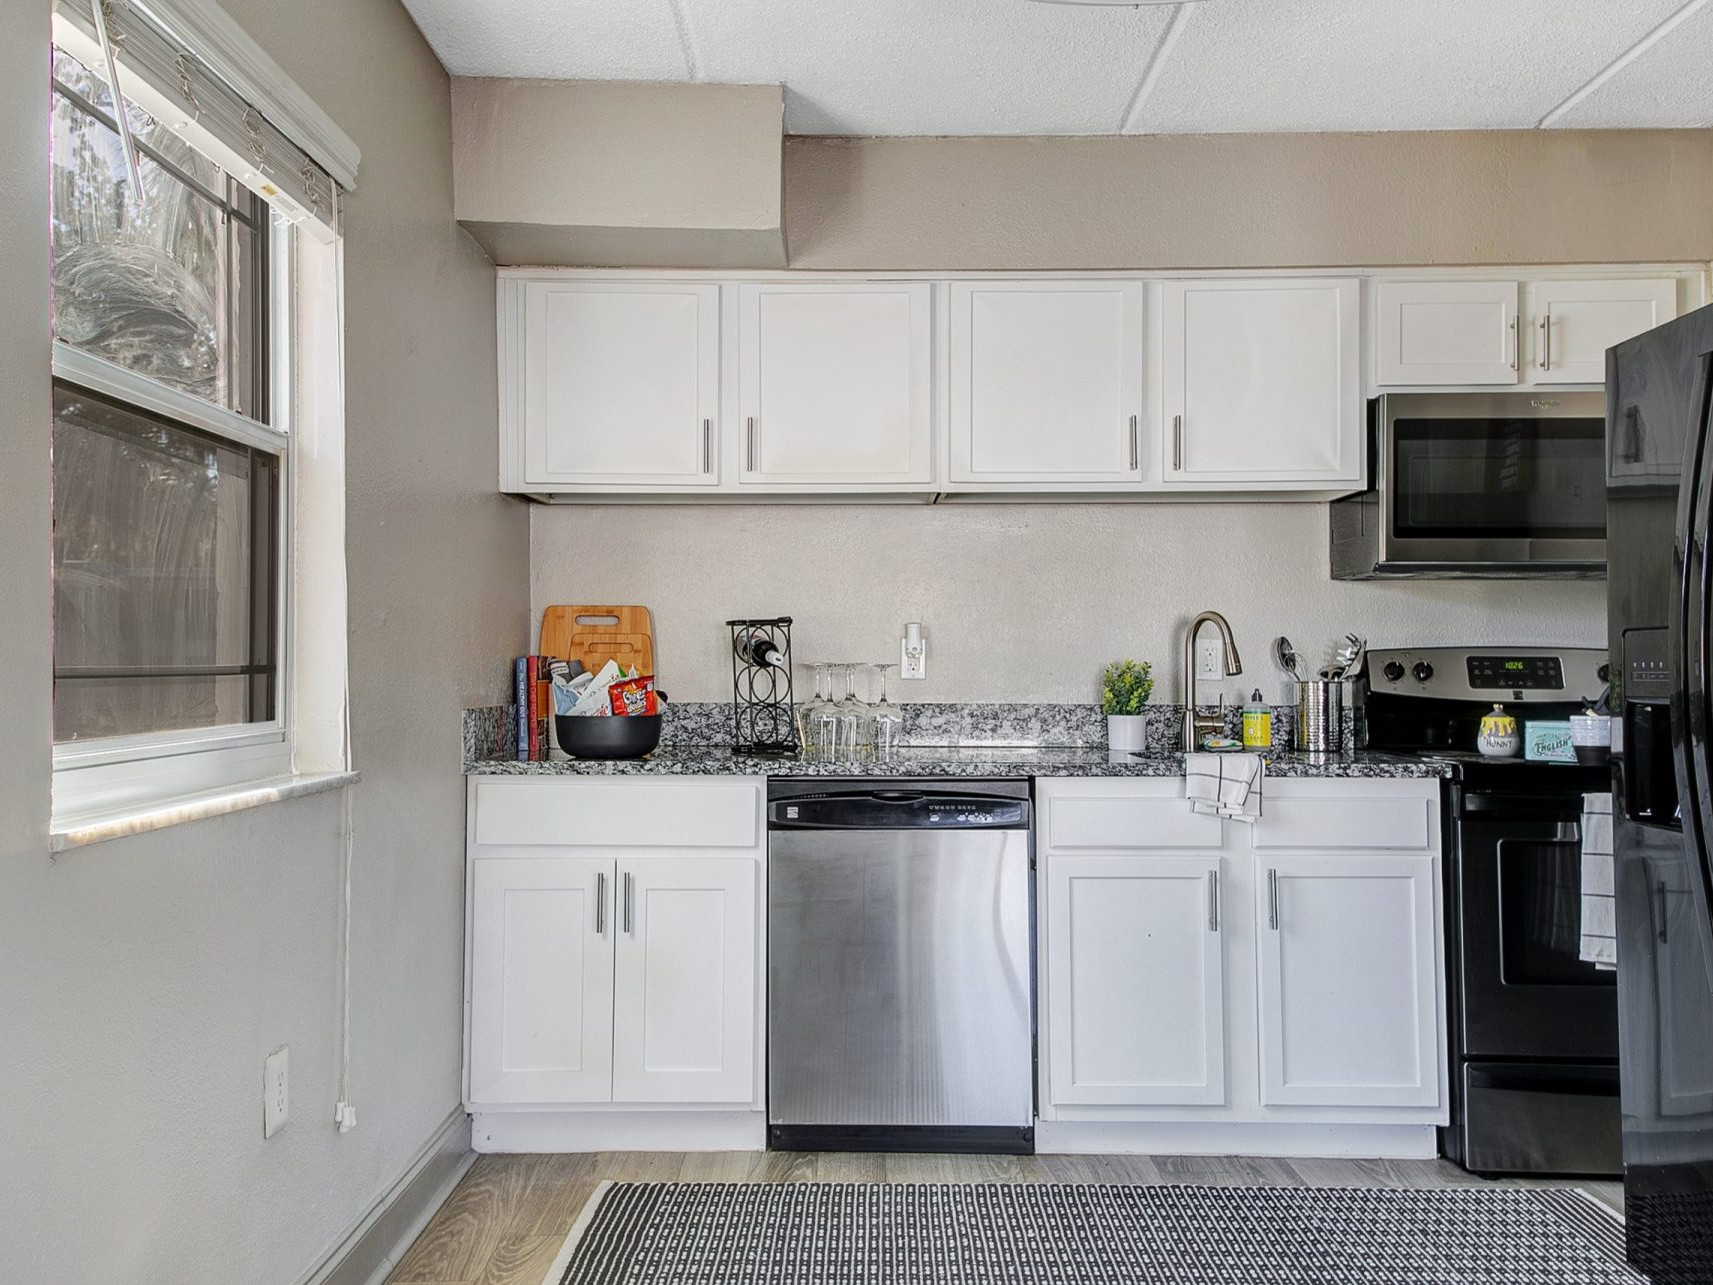 A kitchen with white cabinets, stainless steel appliances, and a window.